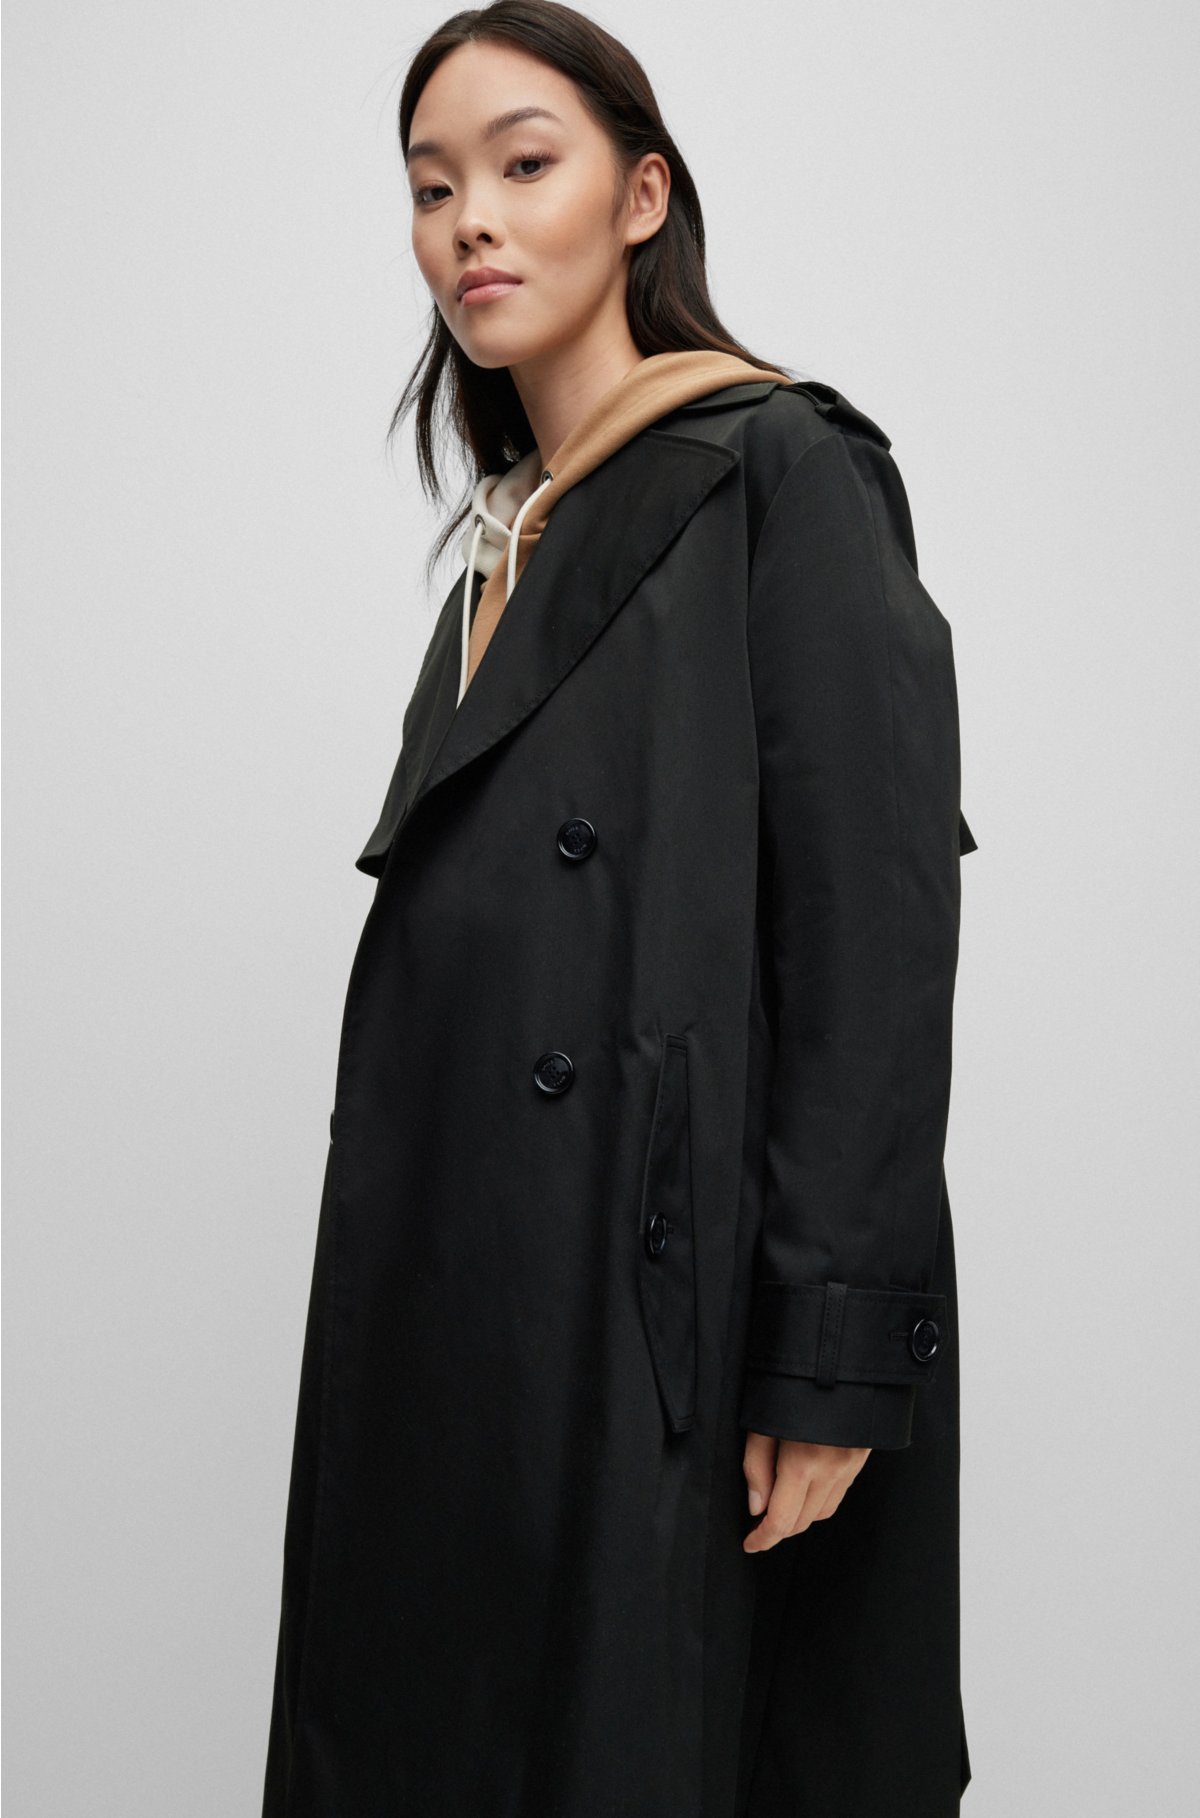 Black belted double-breasted trench coat